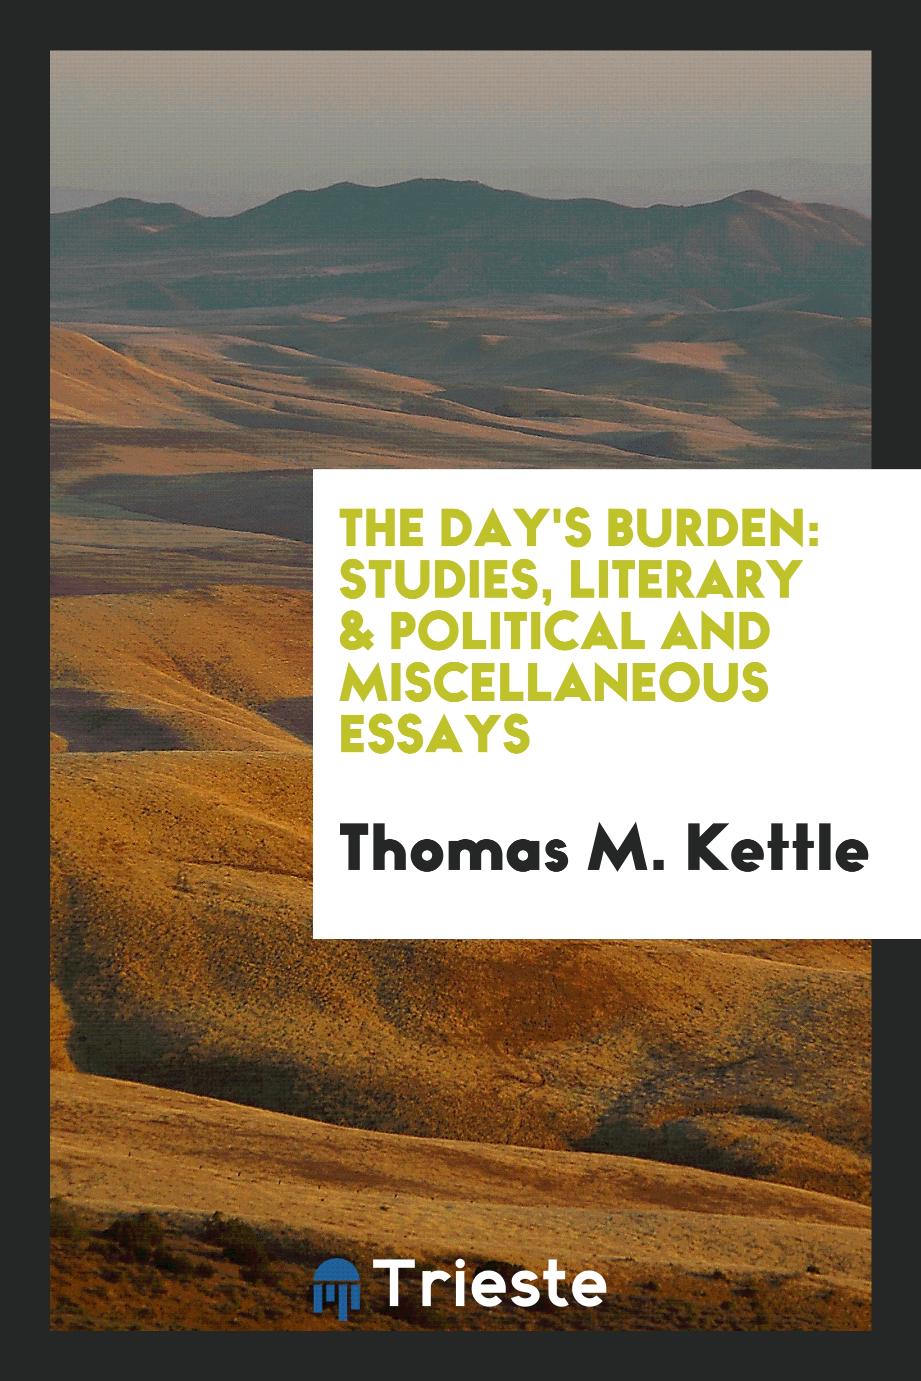 The Day's Burden: Studies, Literary & Political and Miscellaneous Essays